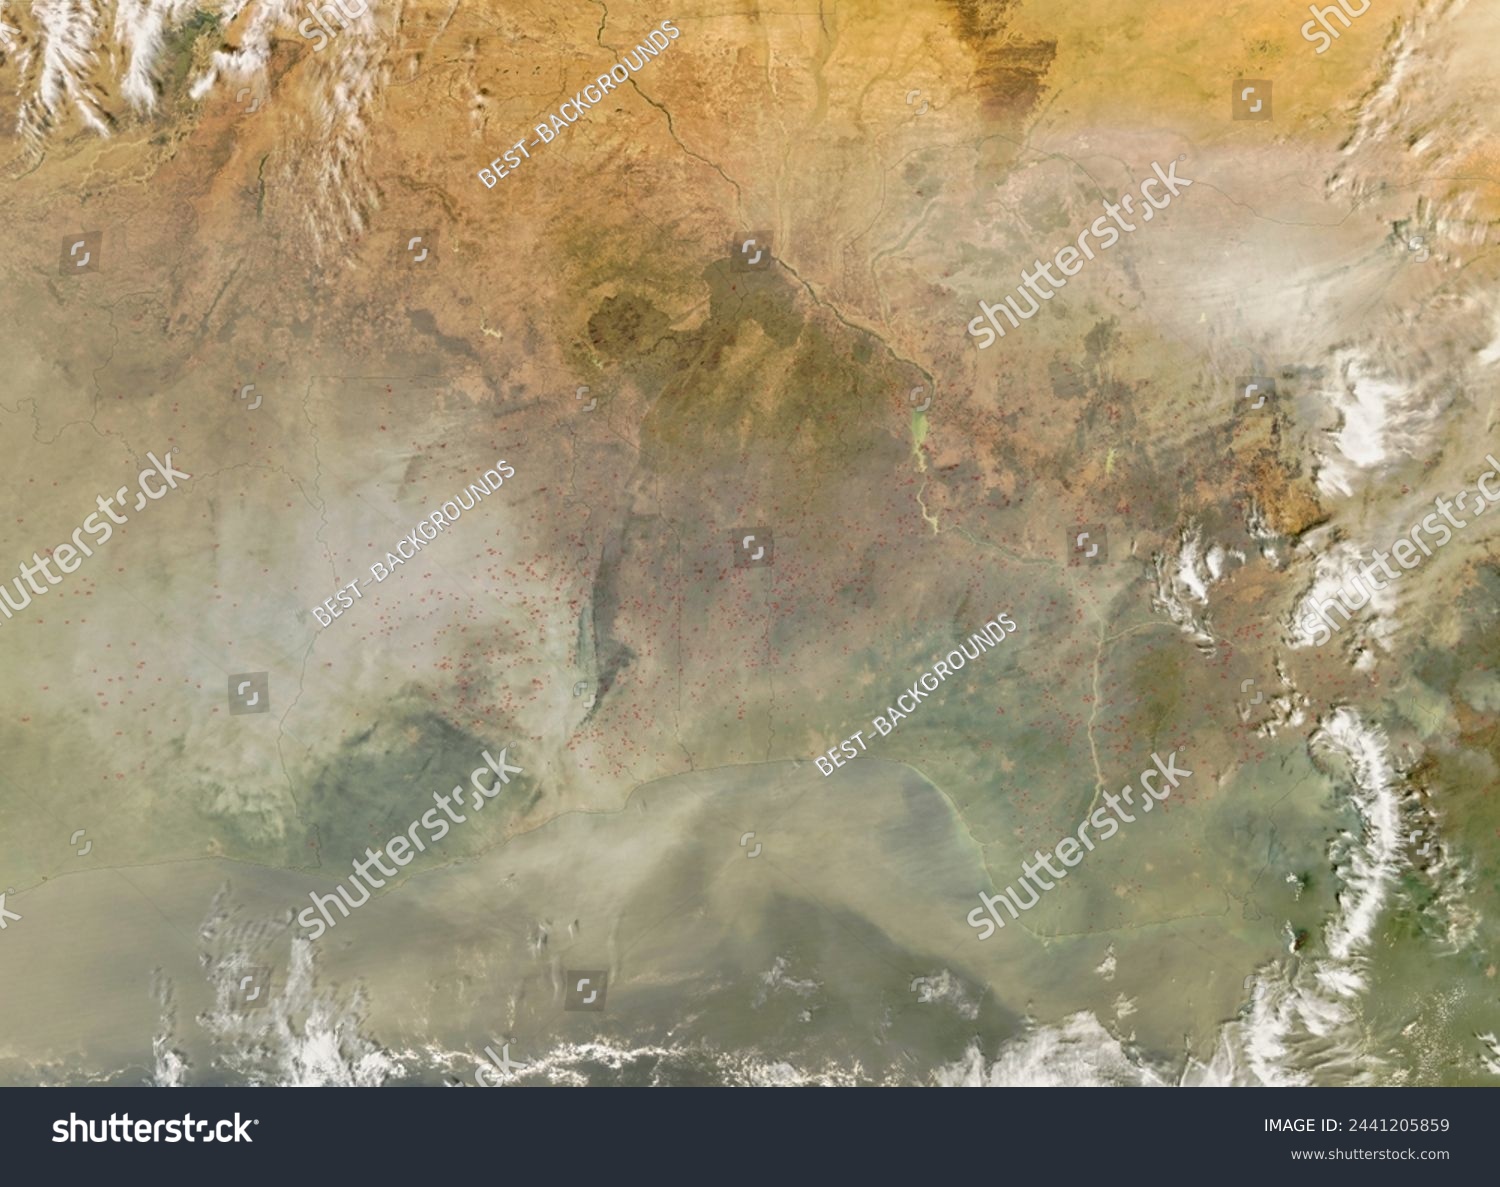 Dust and fires across Central Africa. Dust and fires across Central Africa. Elements of this image furnished by NASA. #2441205859